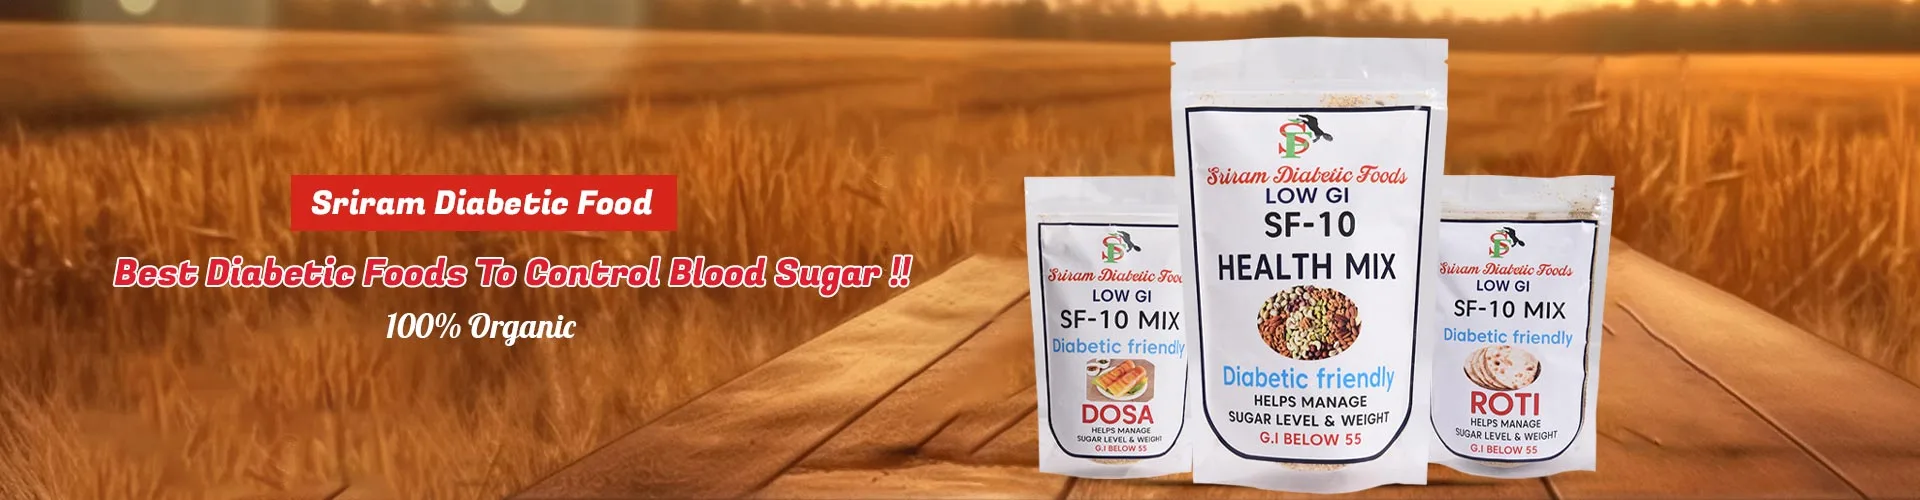 Dosa Mix Manufacturers in Morocco